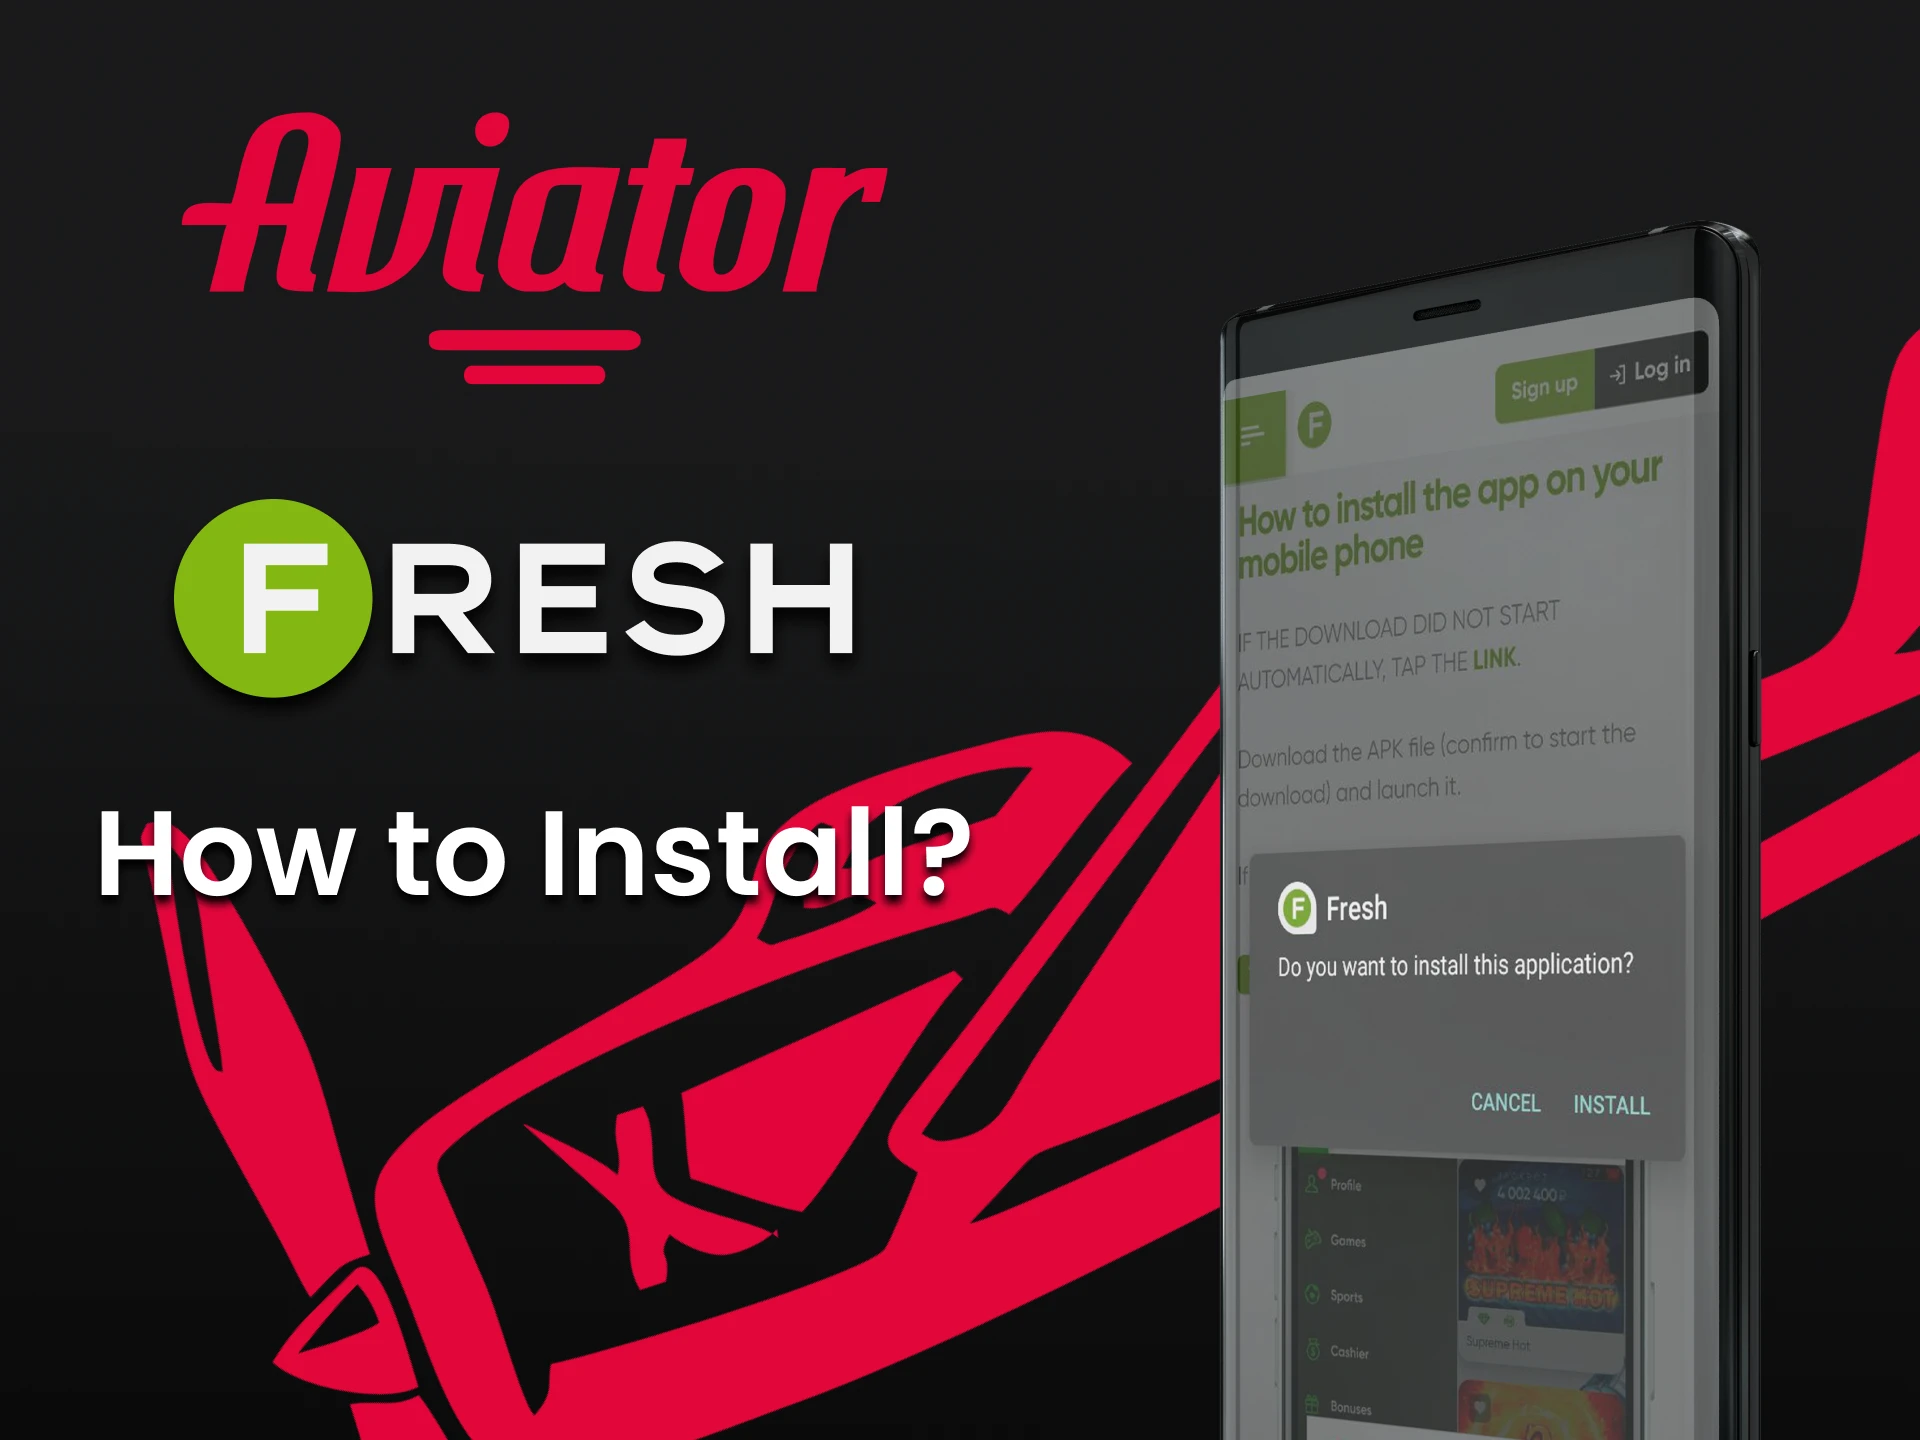 We will tell you how to install the Fresh Casino application to play Aviator.